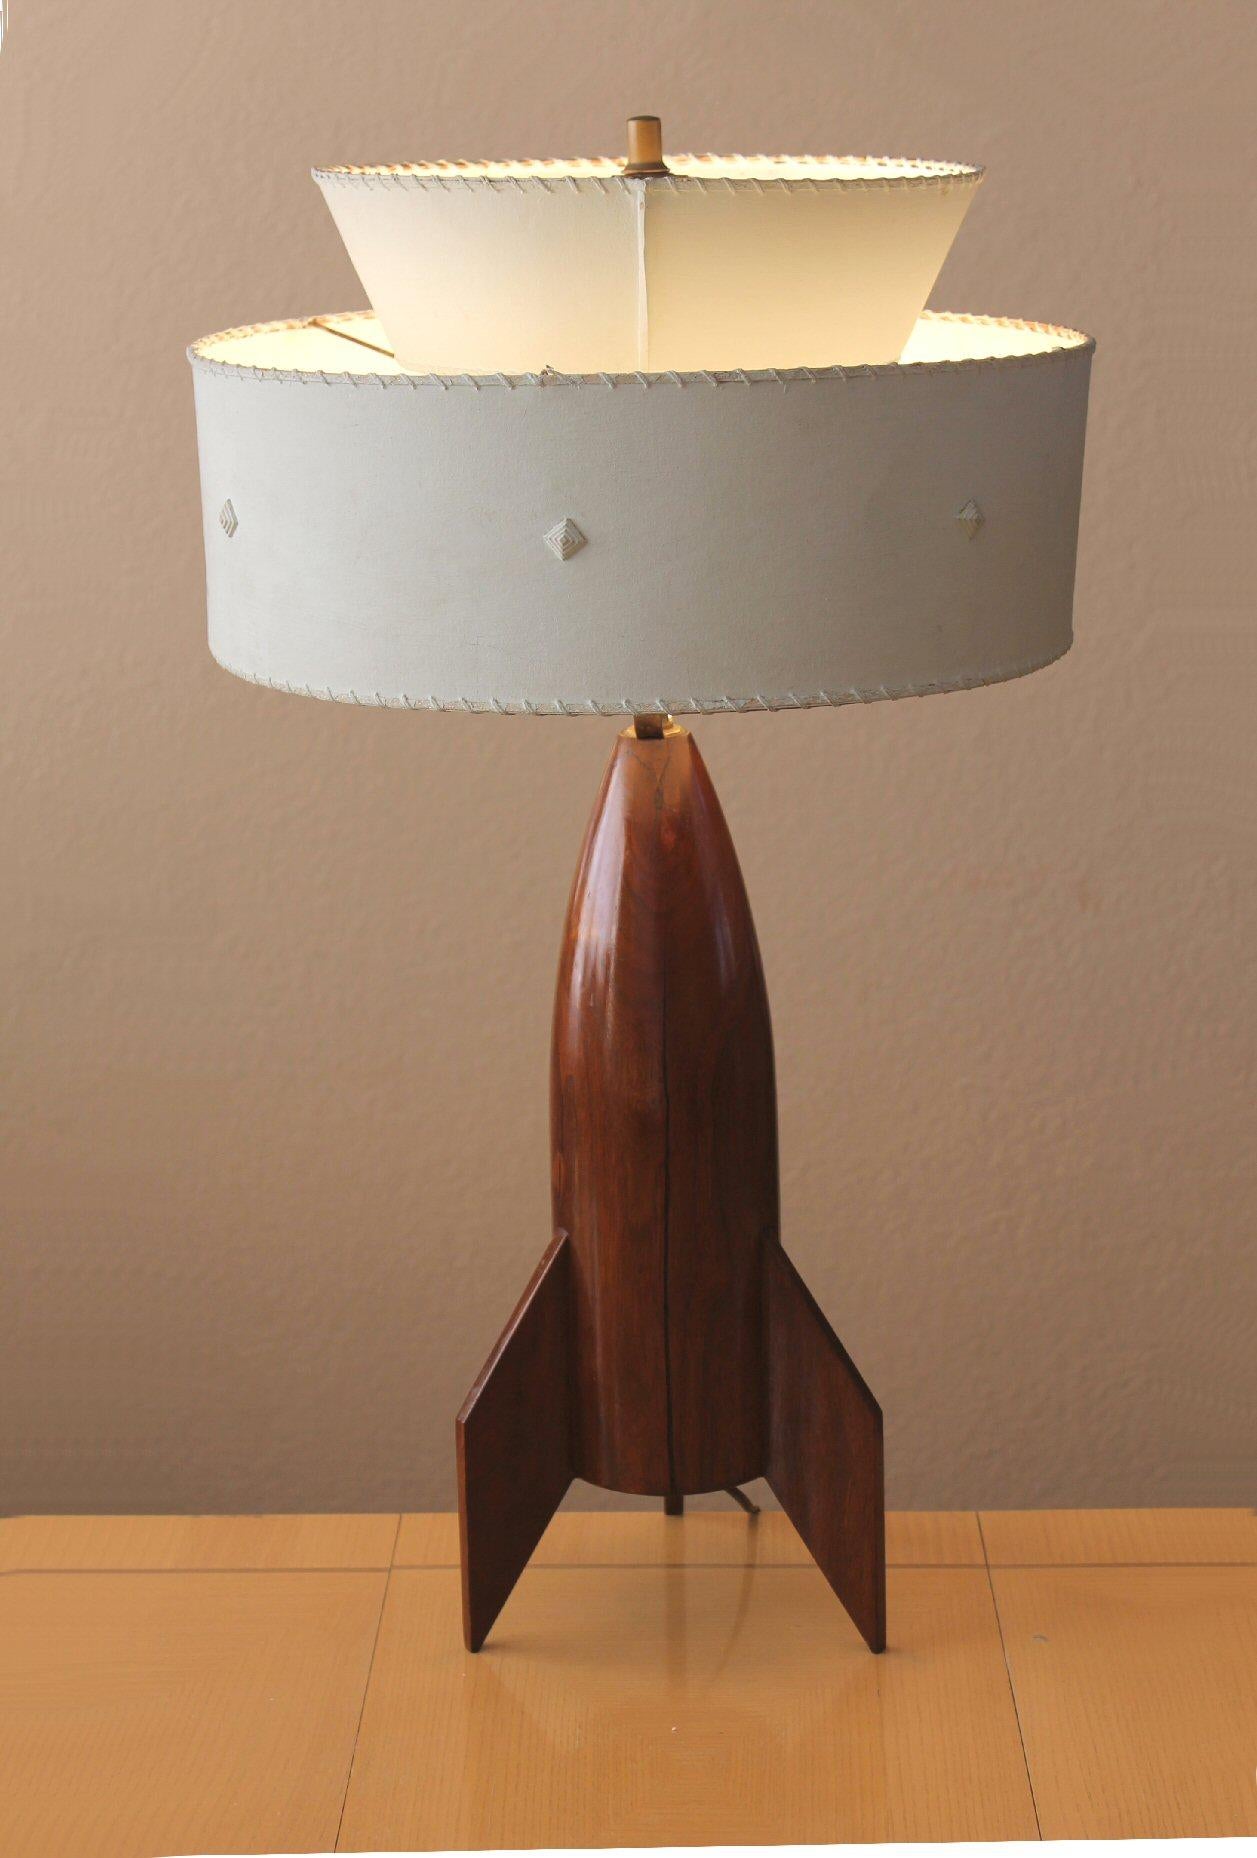 Amazing!

The ULTIMATE Rocket Ship Lamp!

Mid Century Hand Carved Mahogany
Rocket Ship Table Lamp

Hand-painted Fiberglass Shade

1953

This is the finest and most impressive rocket ship lamp in the world!  The simple design harks back to the V2